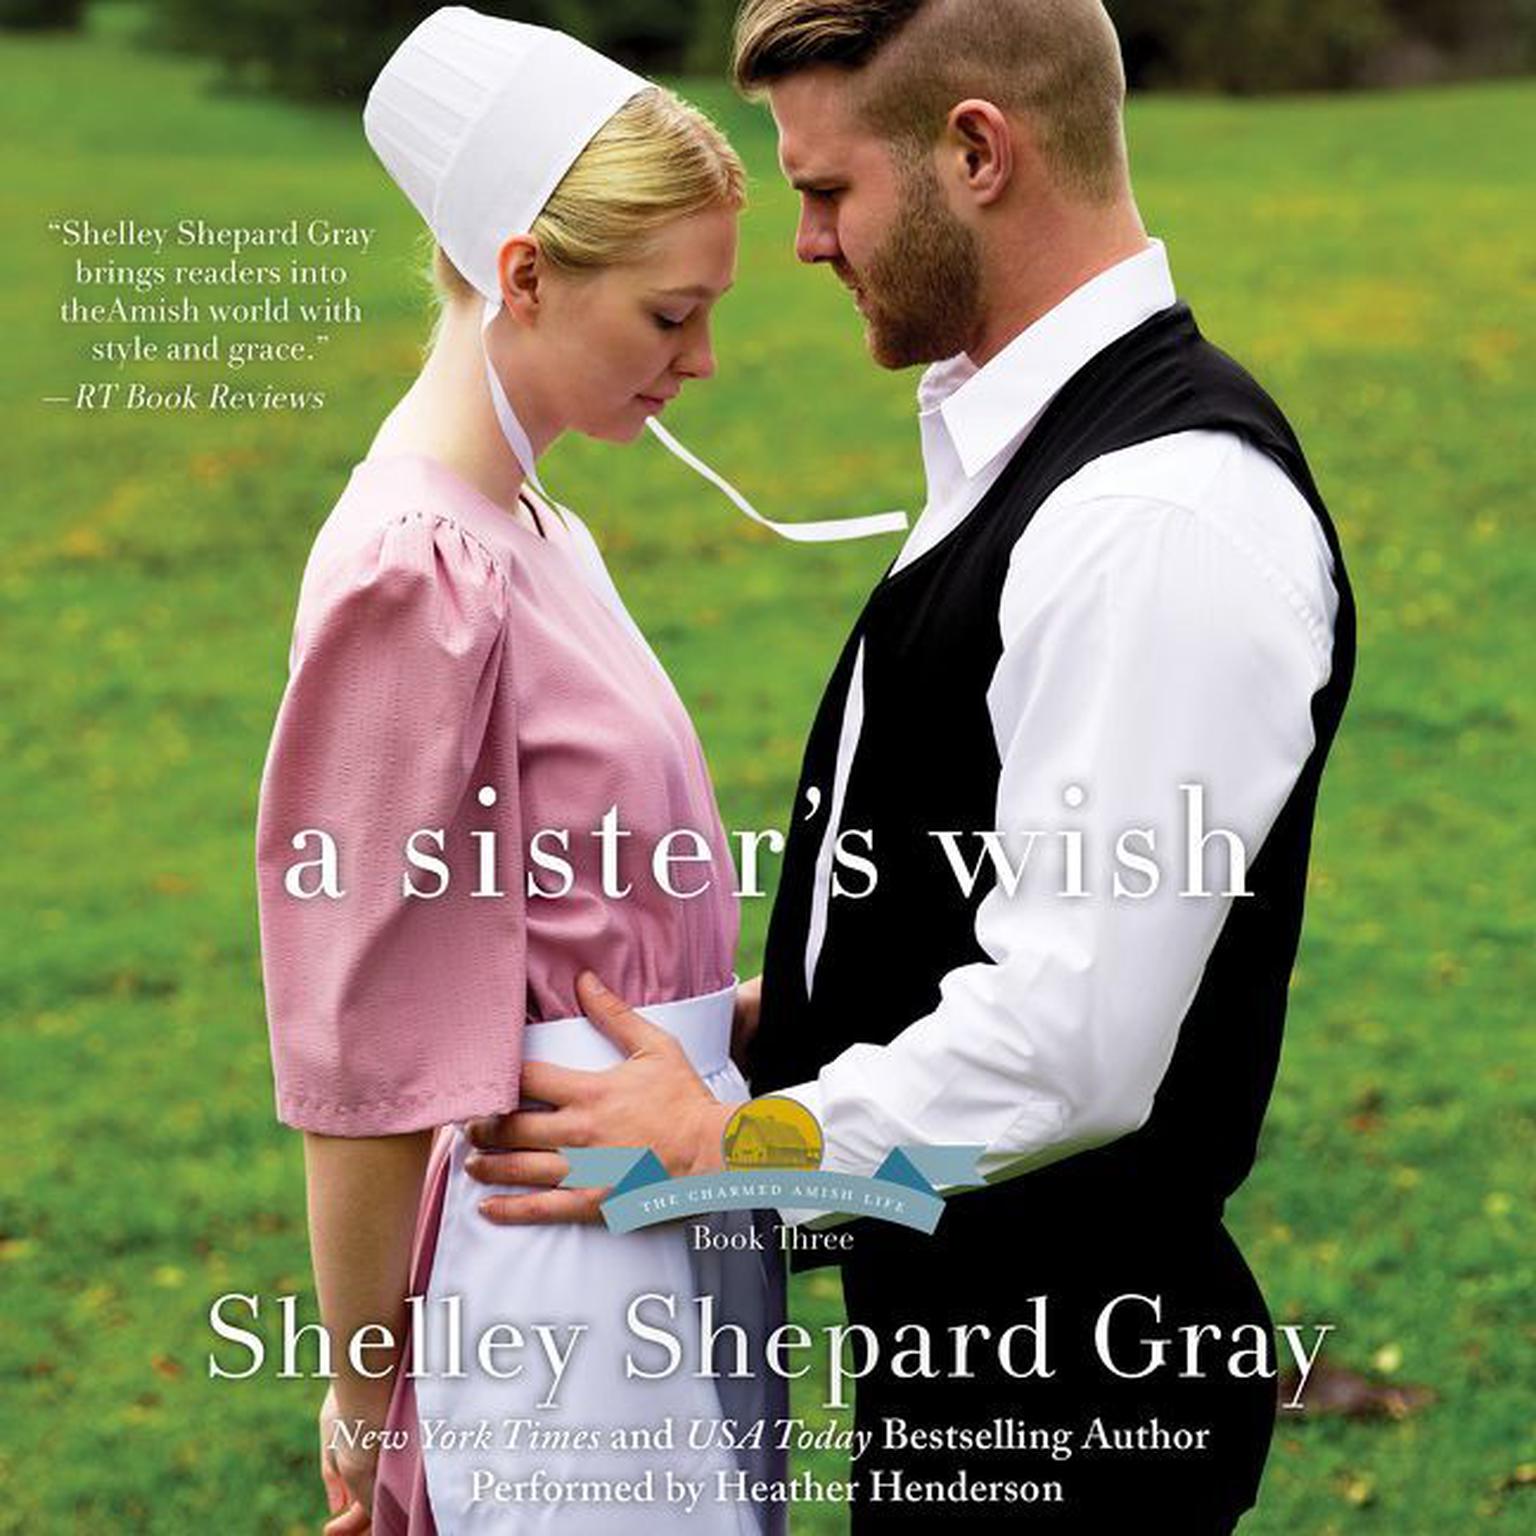 A Sisters Wish: The Charmed Amish Life, Book Three Audiobook, by Shelley Shepard Gray